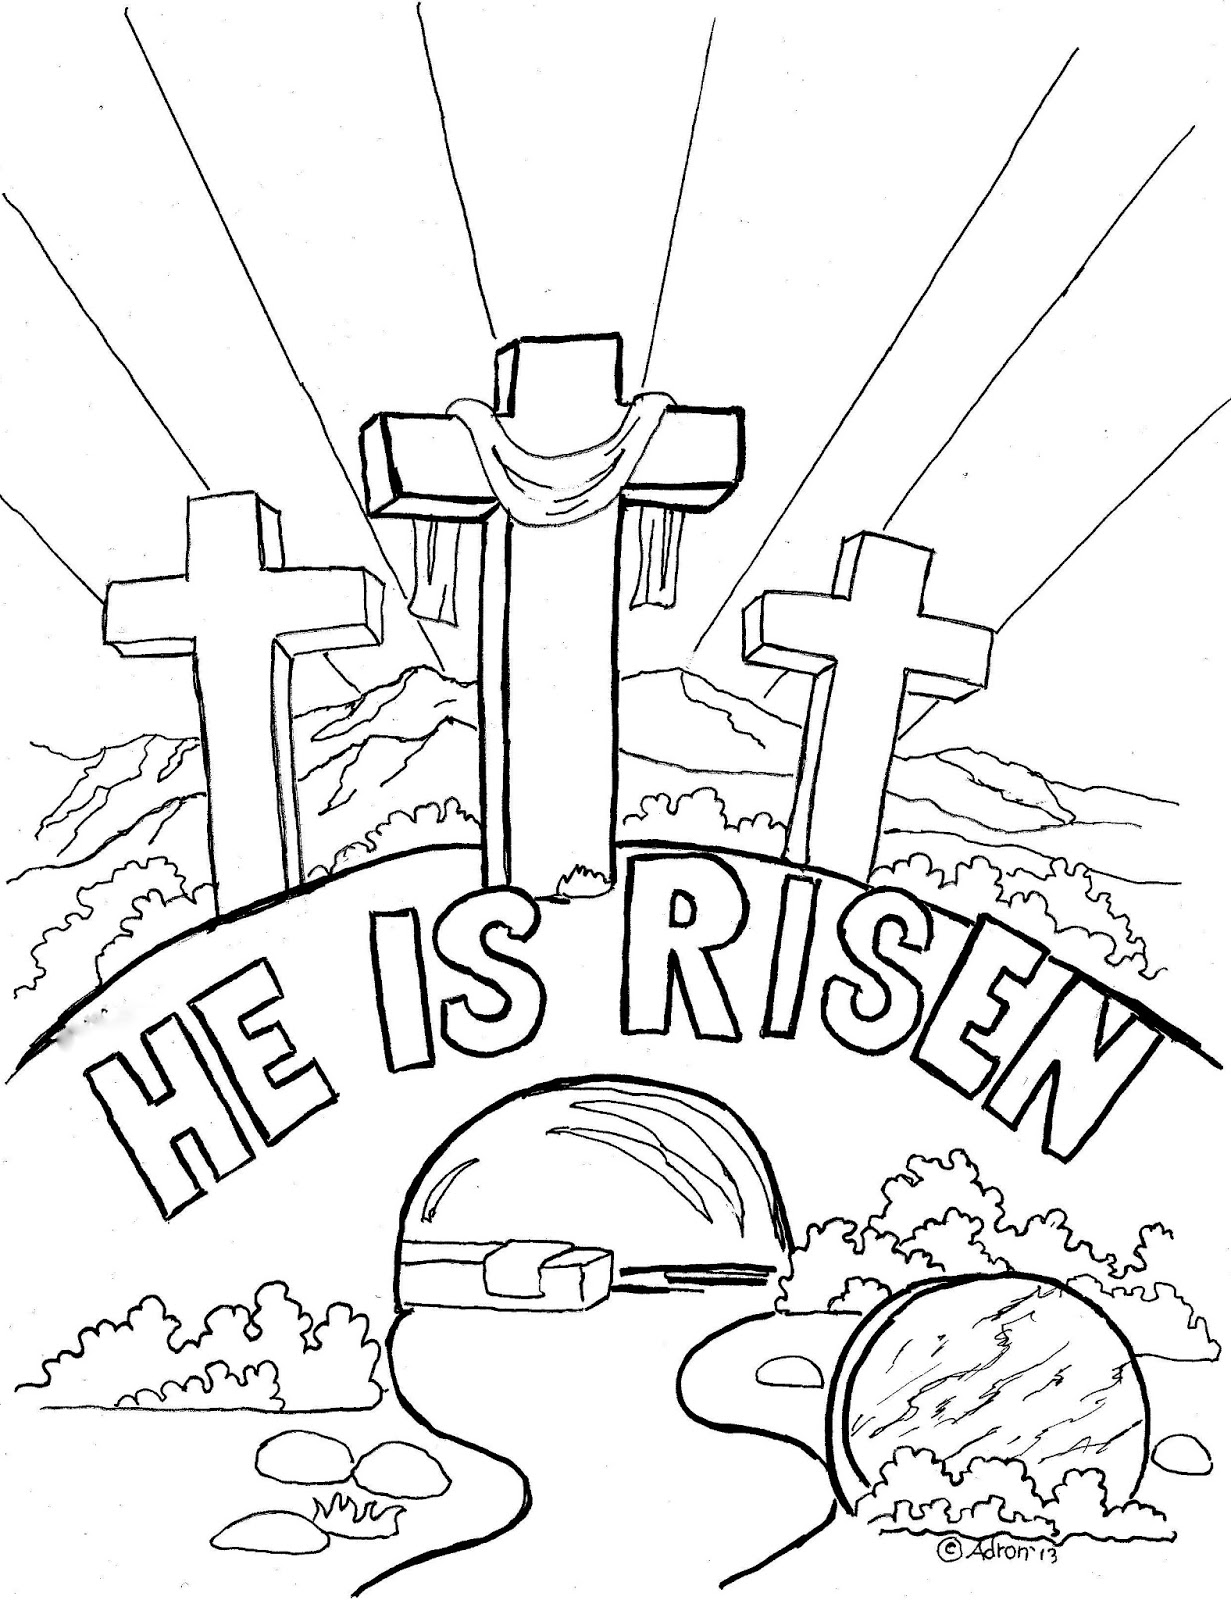 Coloring Pages for Kids by Mr. Adron: Easter Coloring Page For Kids